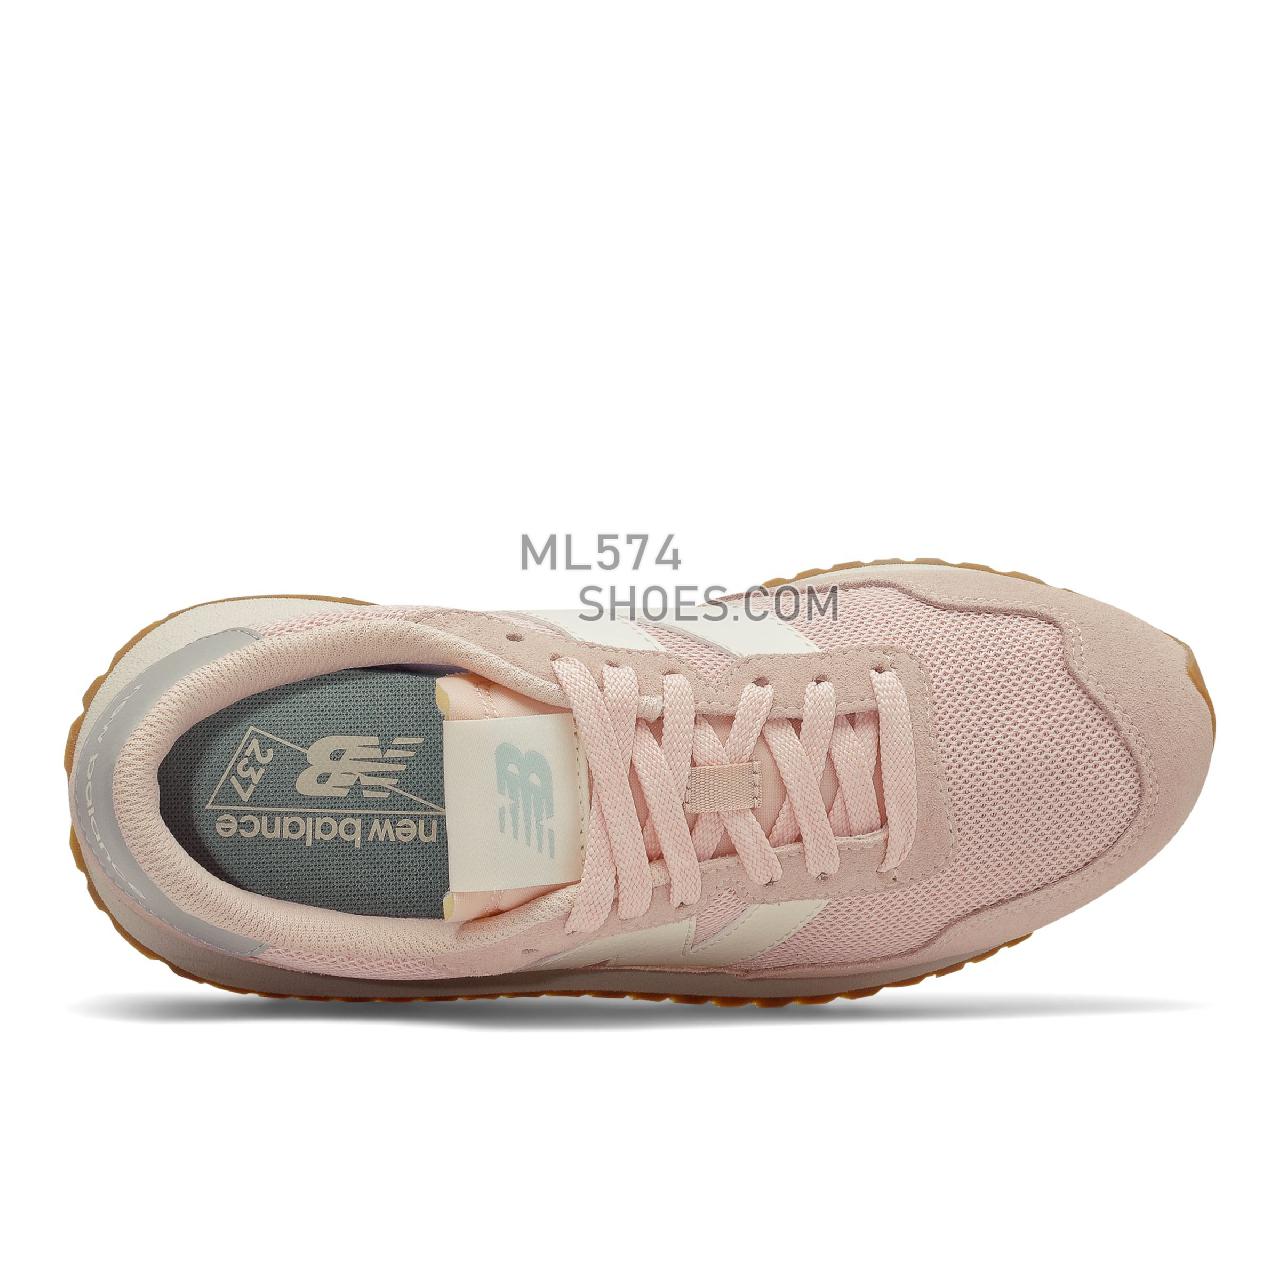 New Balance 237 - Women's Sport Style Sneakers - Oyster Pink with Storm Blue - WS237HL1